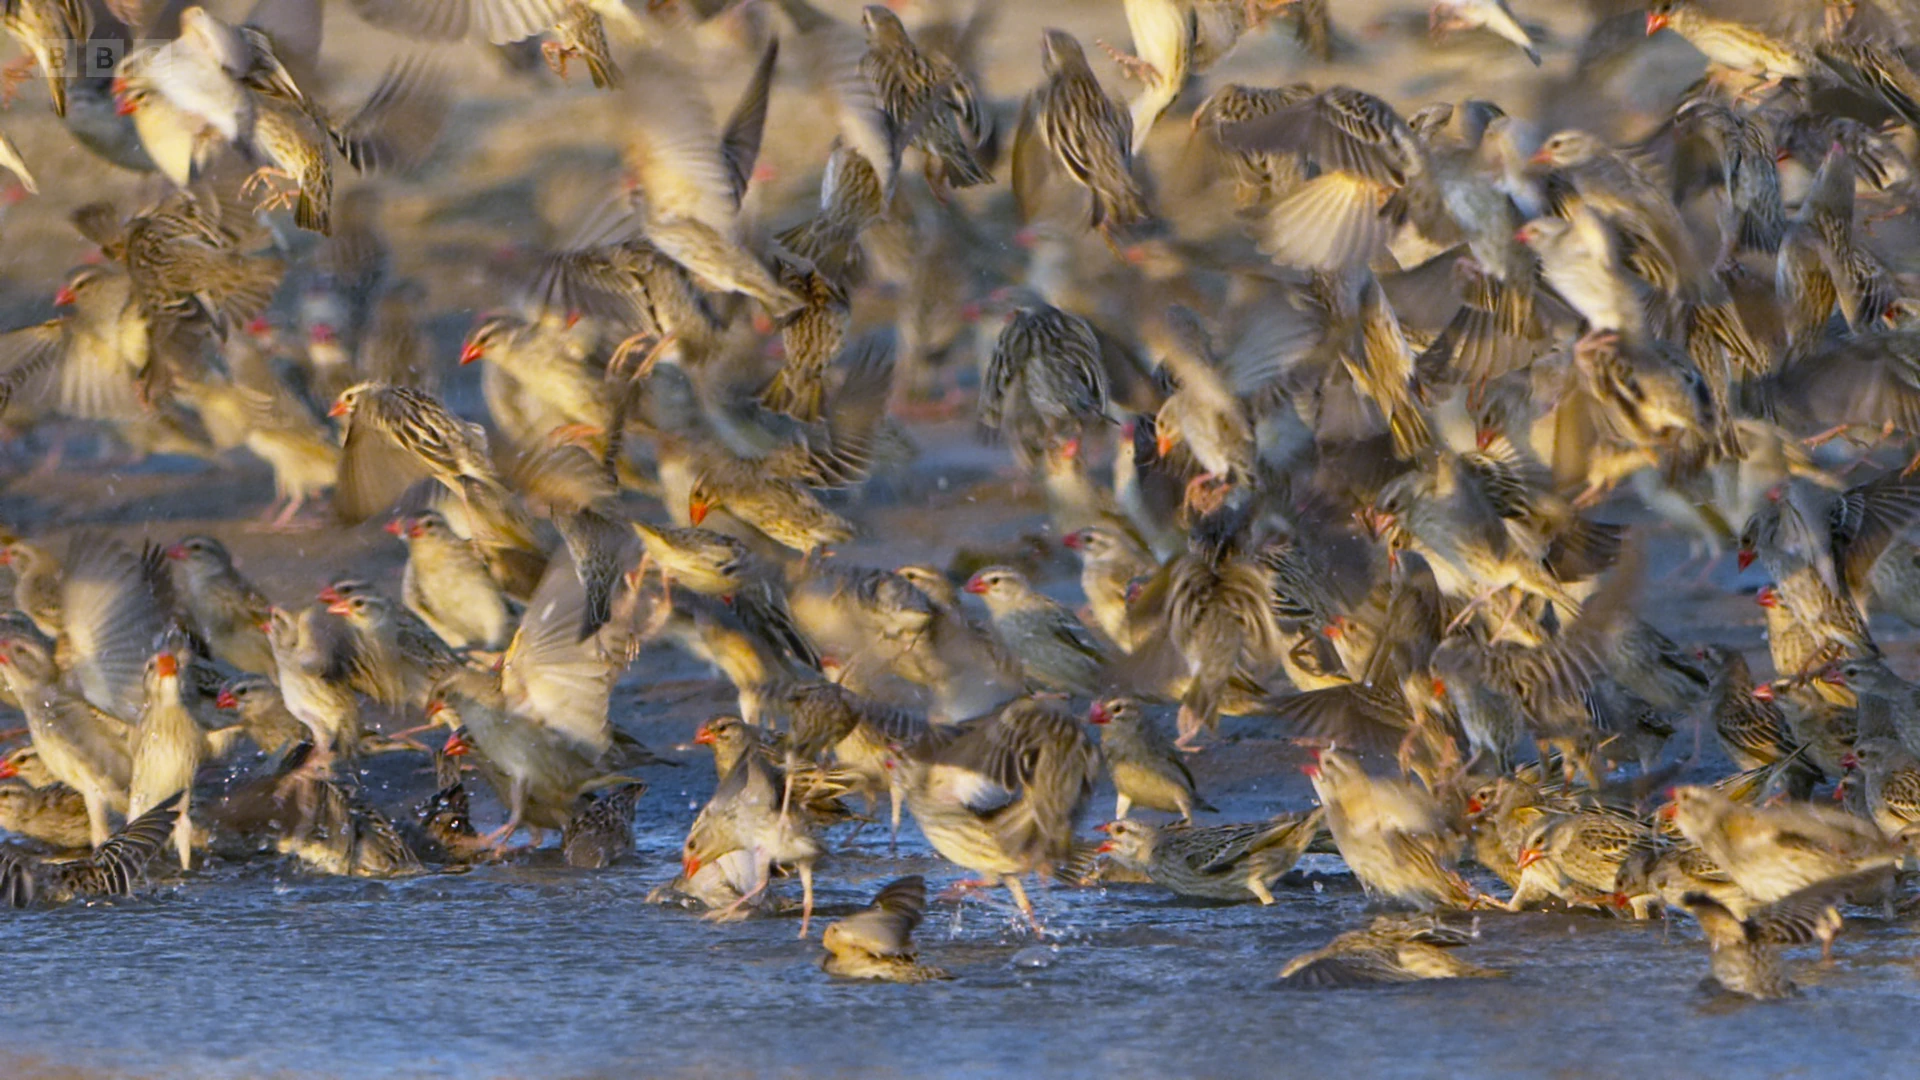 Red-billed quelea (Quelea quelea lathamii) as shown in A Perfect Planet - Weather